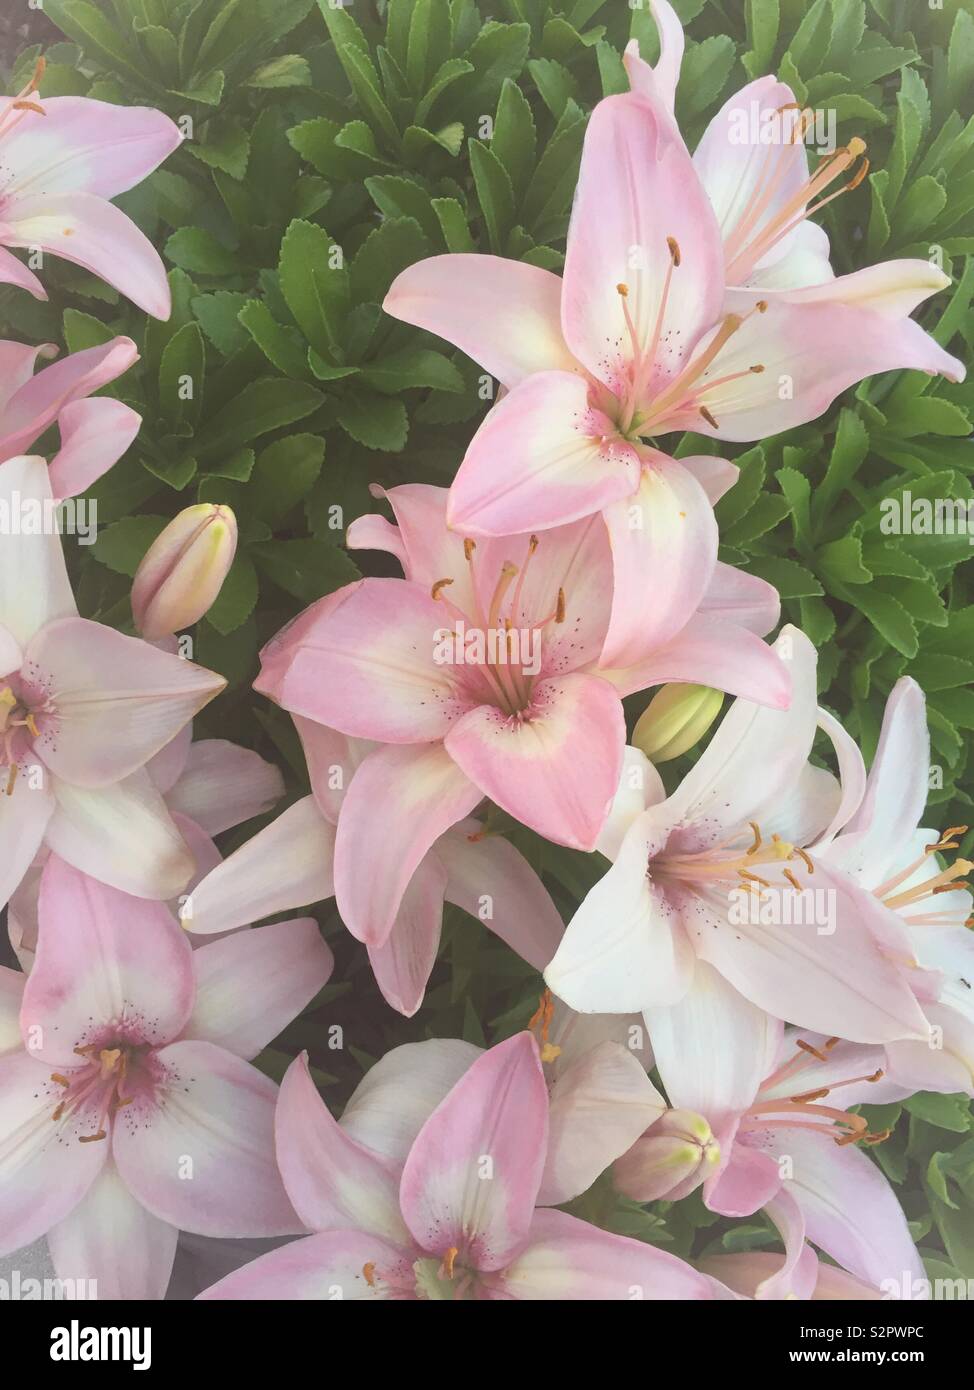 Close up of blooming pink lilies Stock Photo